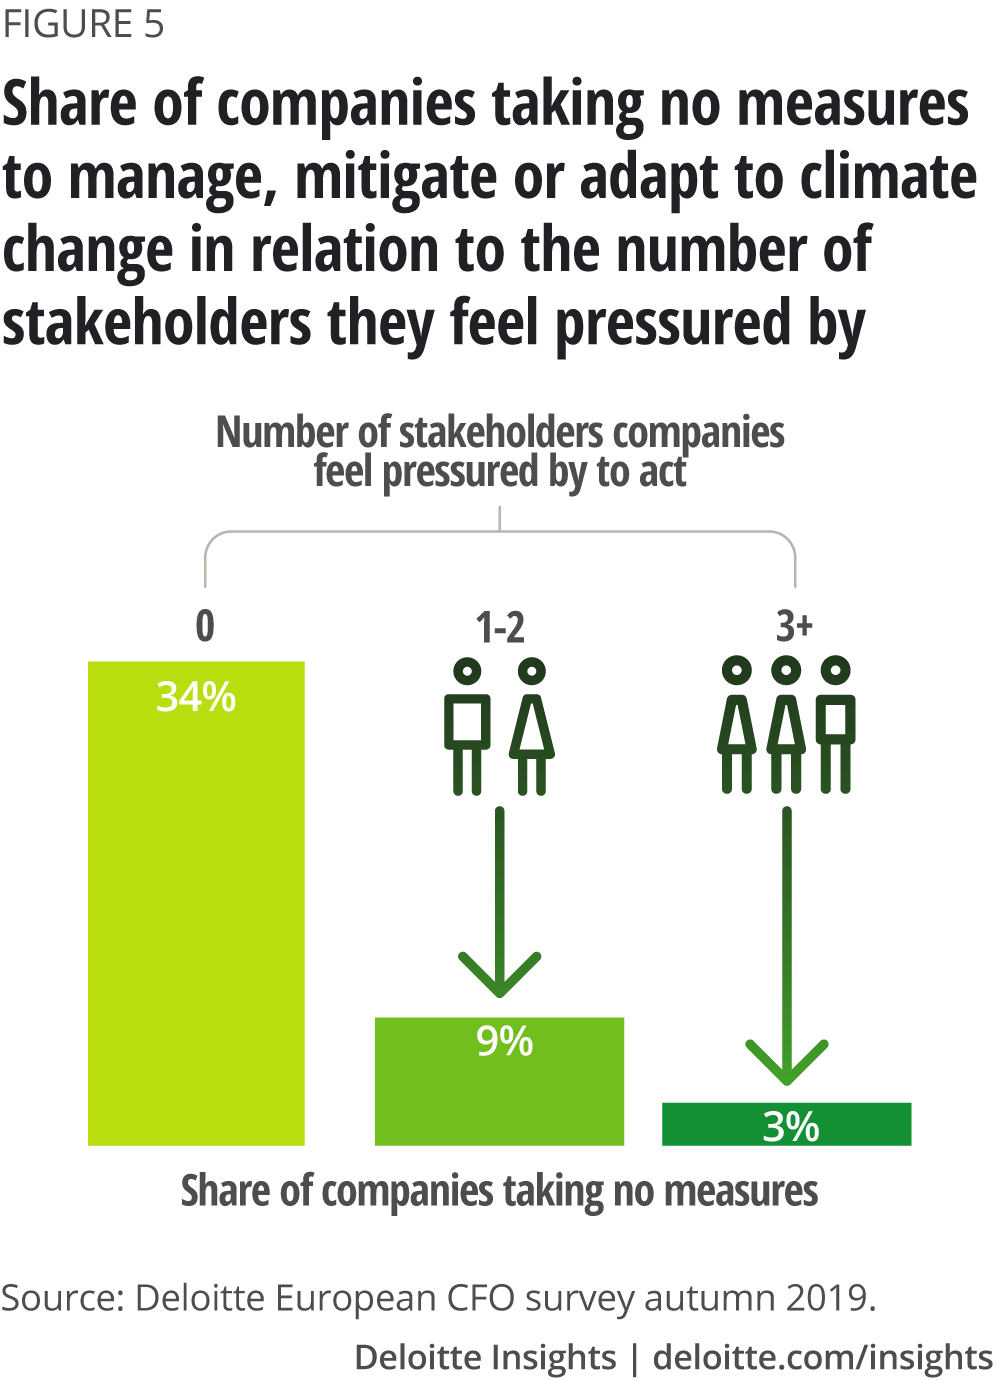 Share of companies taking no measures to manage, mitigate or adapt to climate change in relation to the number of stakeholders they feel pressured by